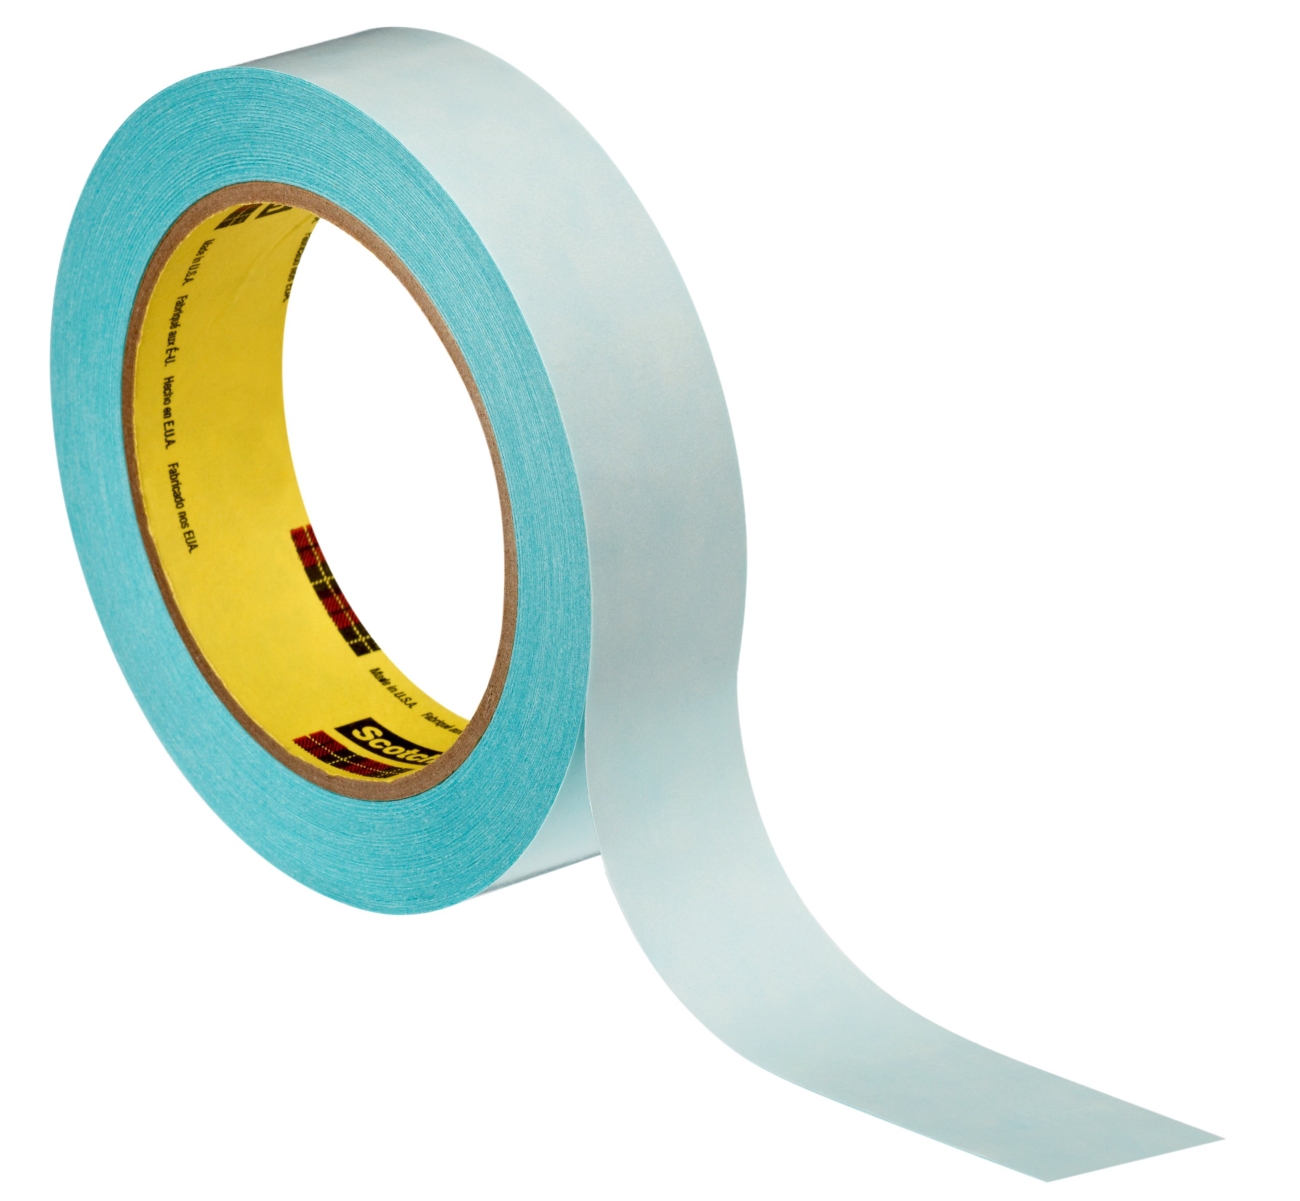 3M Double-sided splicing tape 900, water-dispersible, blue, 50 mm x 50 m, 0.08 mm